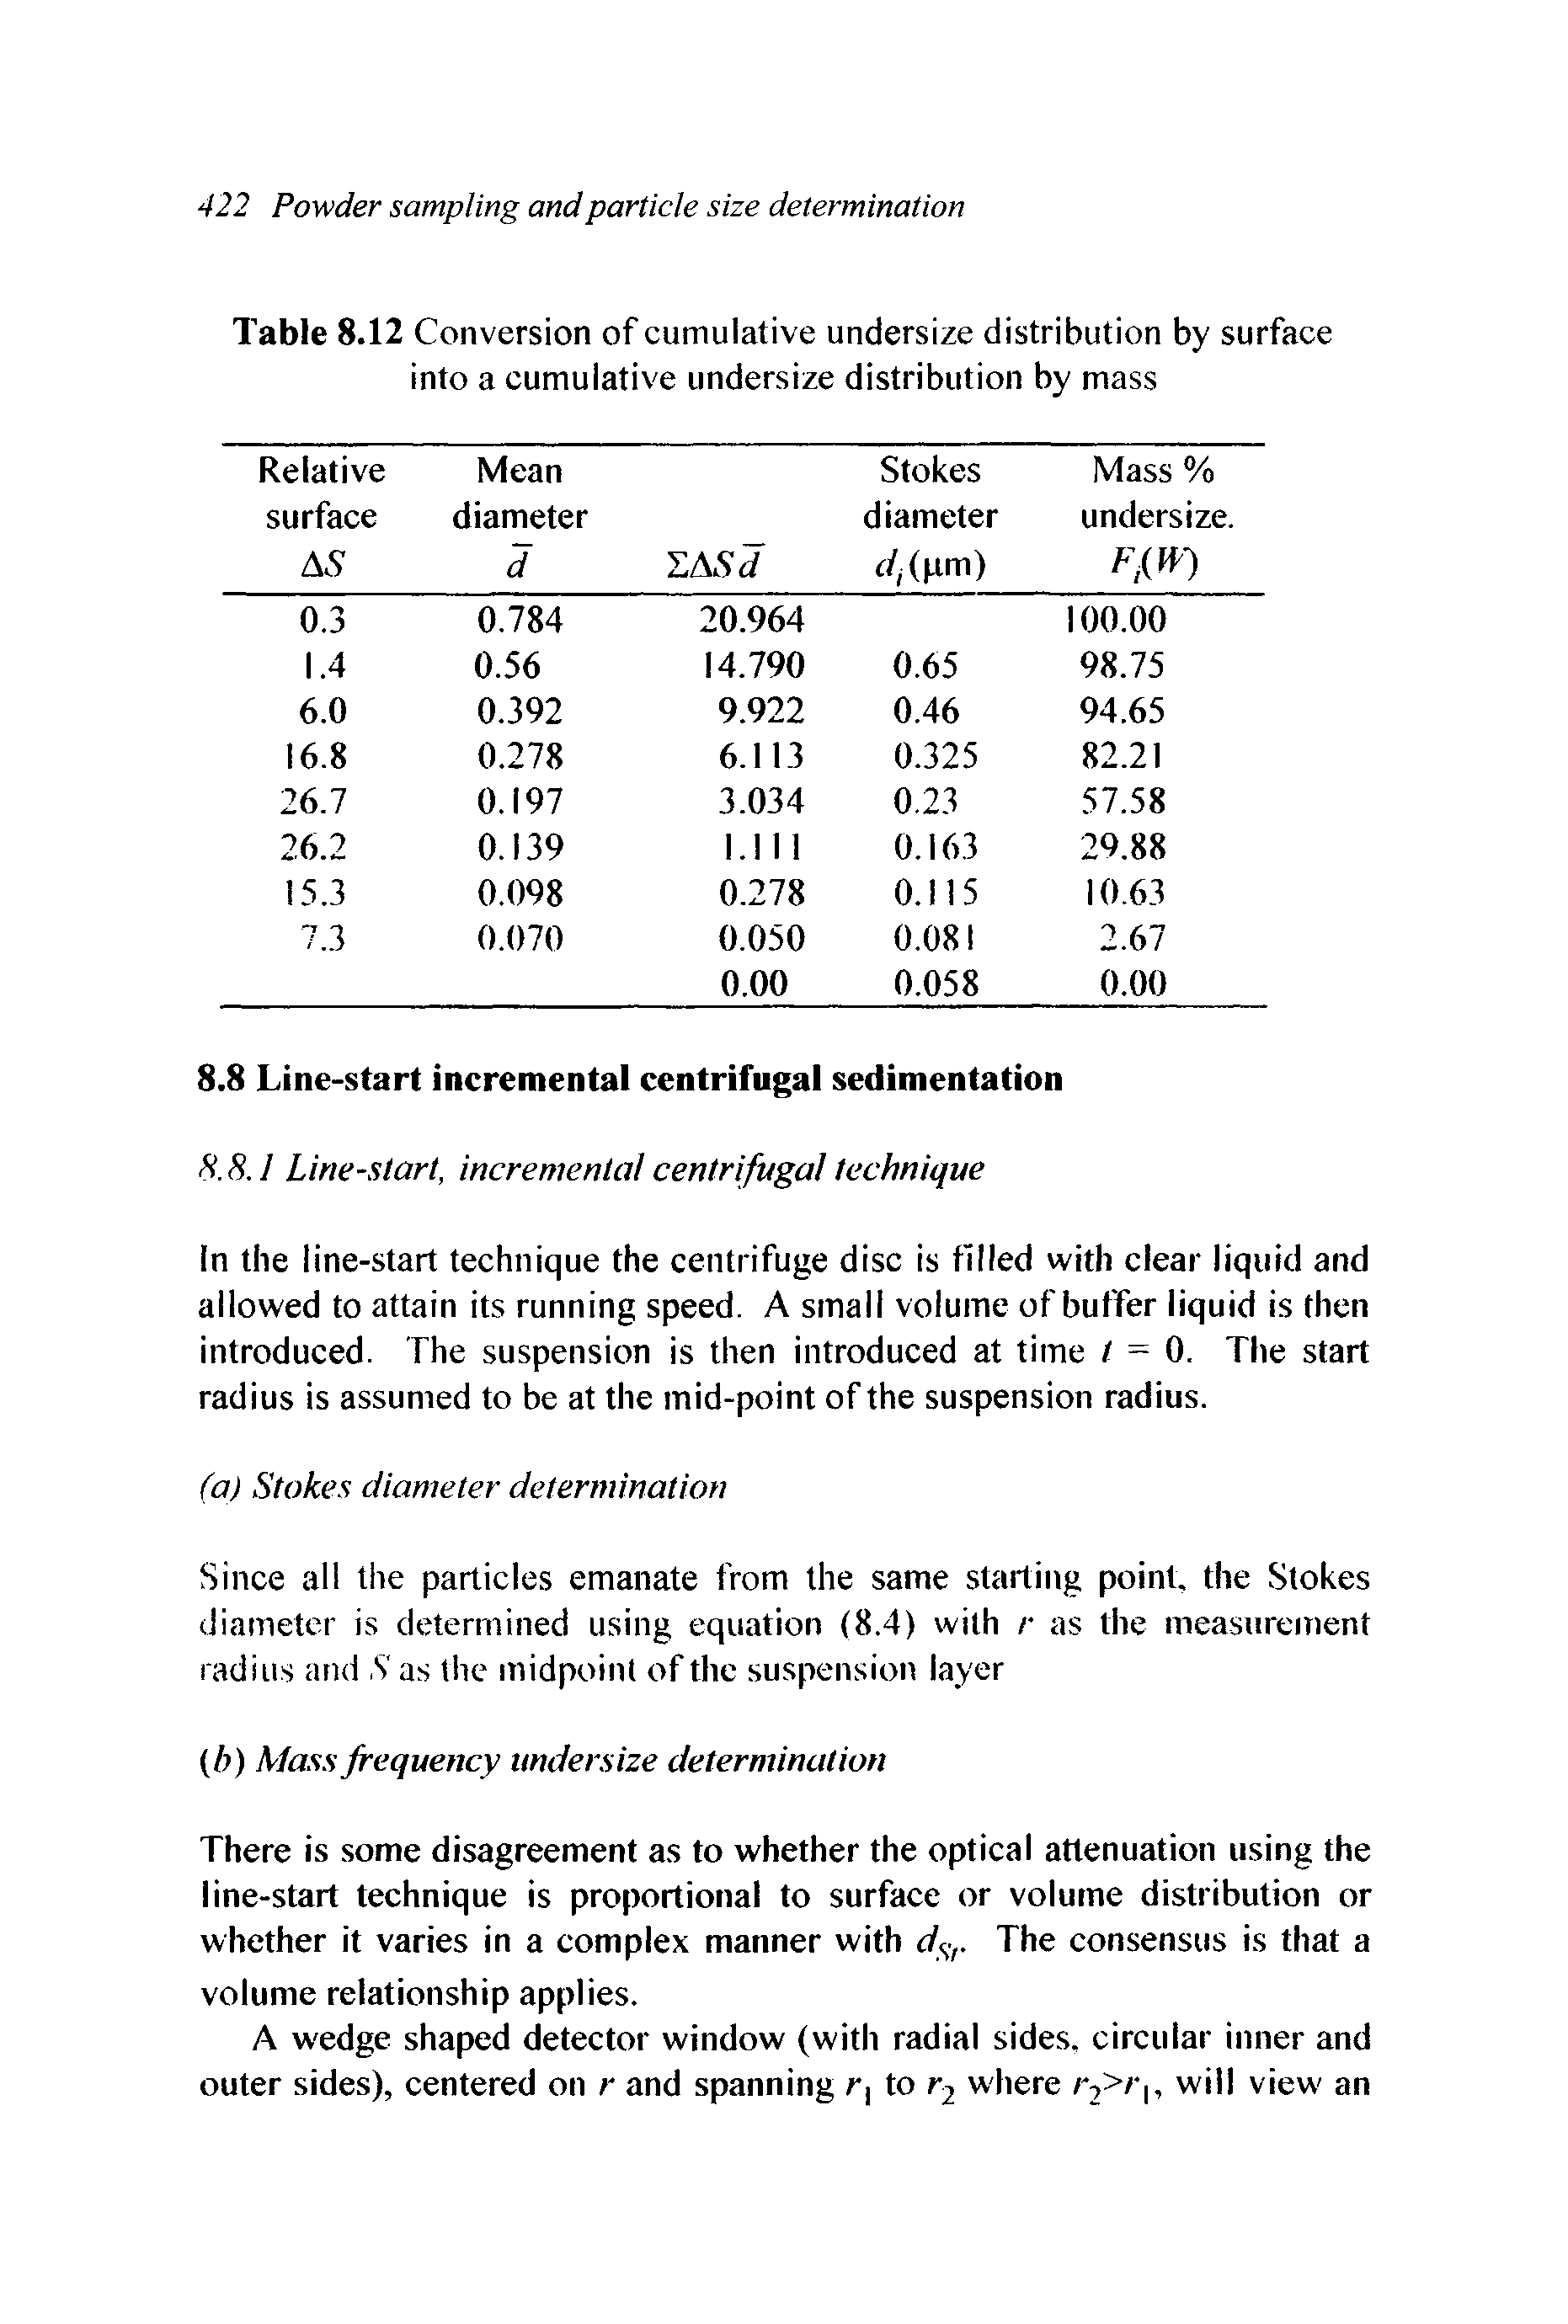 Table 8.12 Conversion of cumulative undersize distribution by surface into a cumulative undersize distribution by mass...